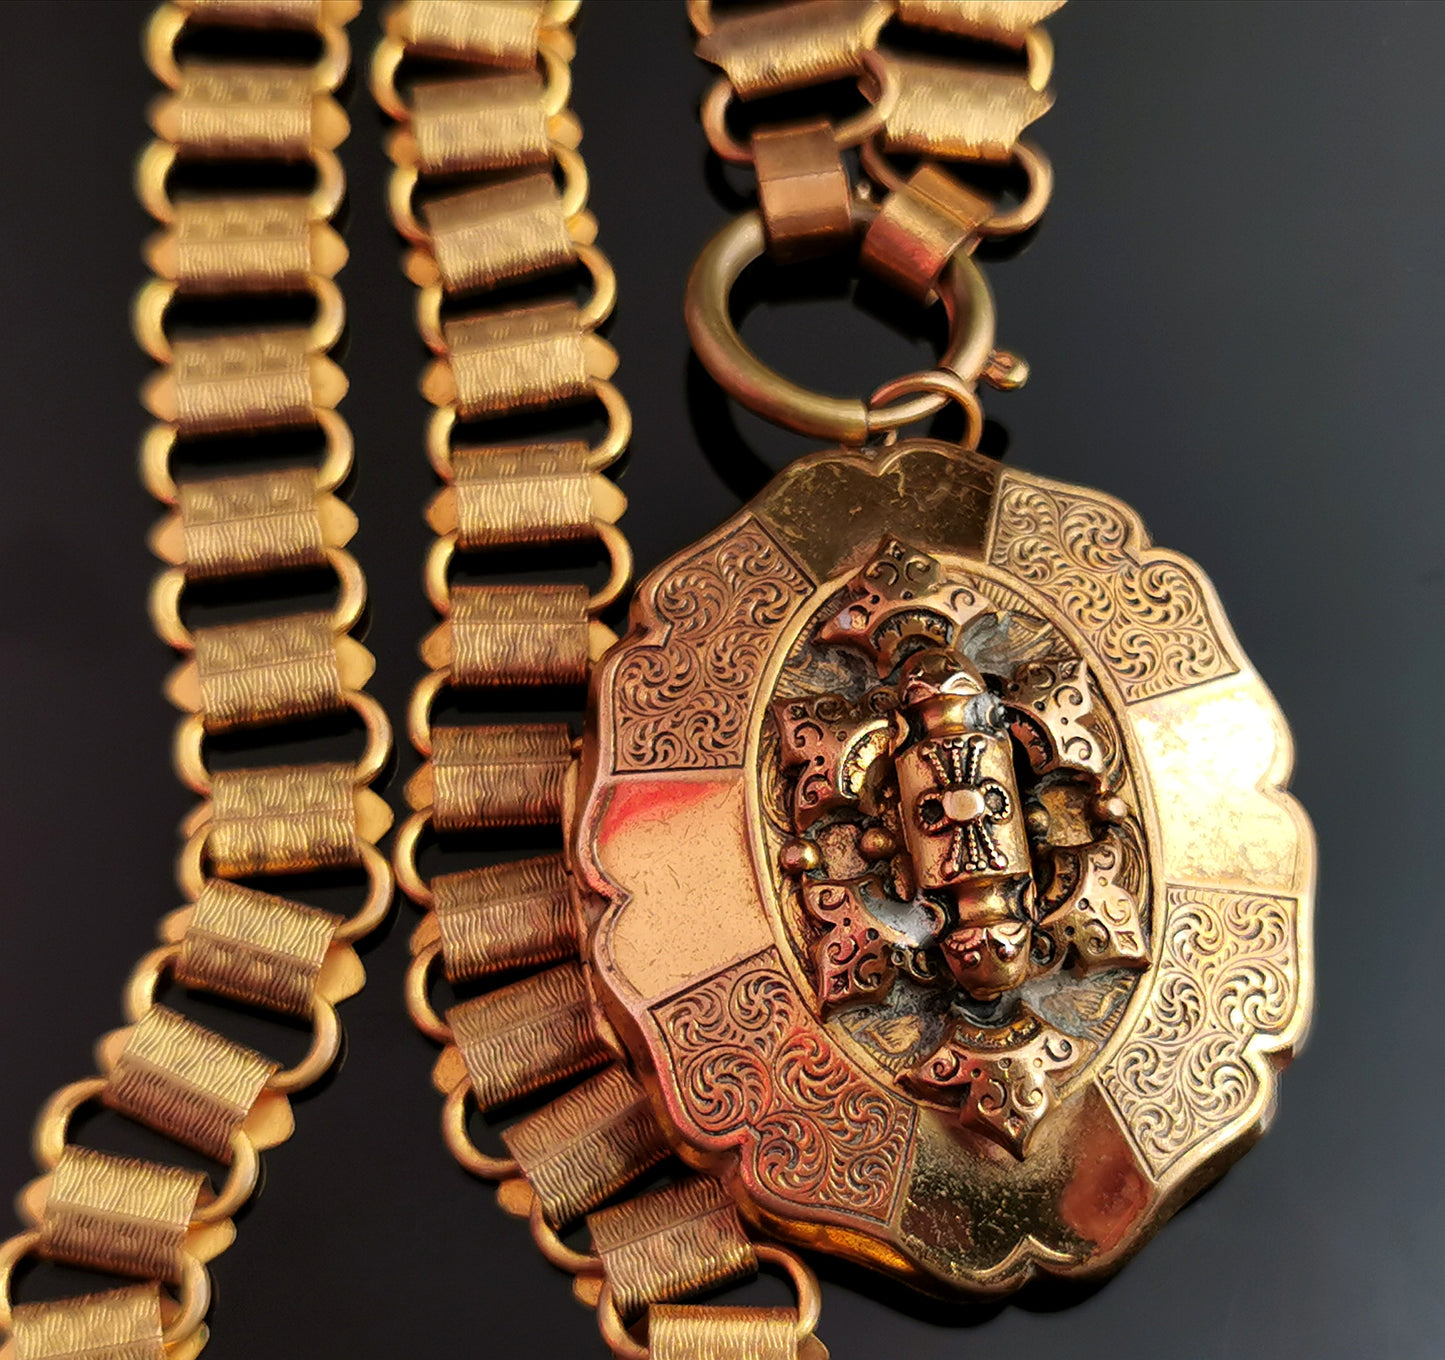 Victorian gilt locket and book chain necklace